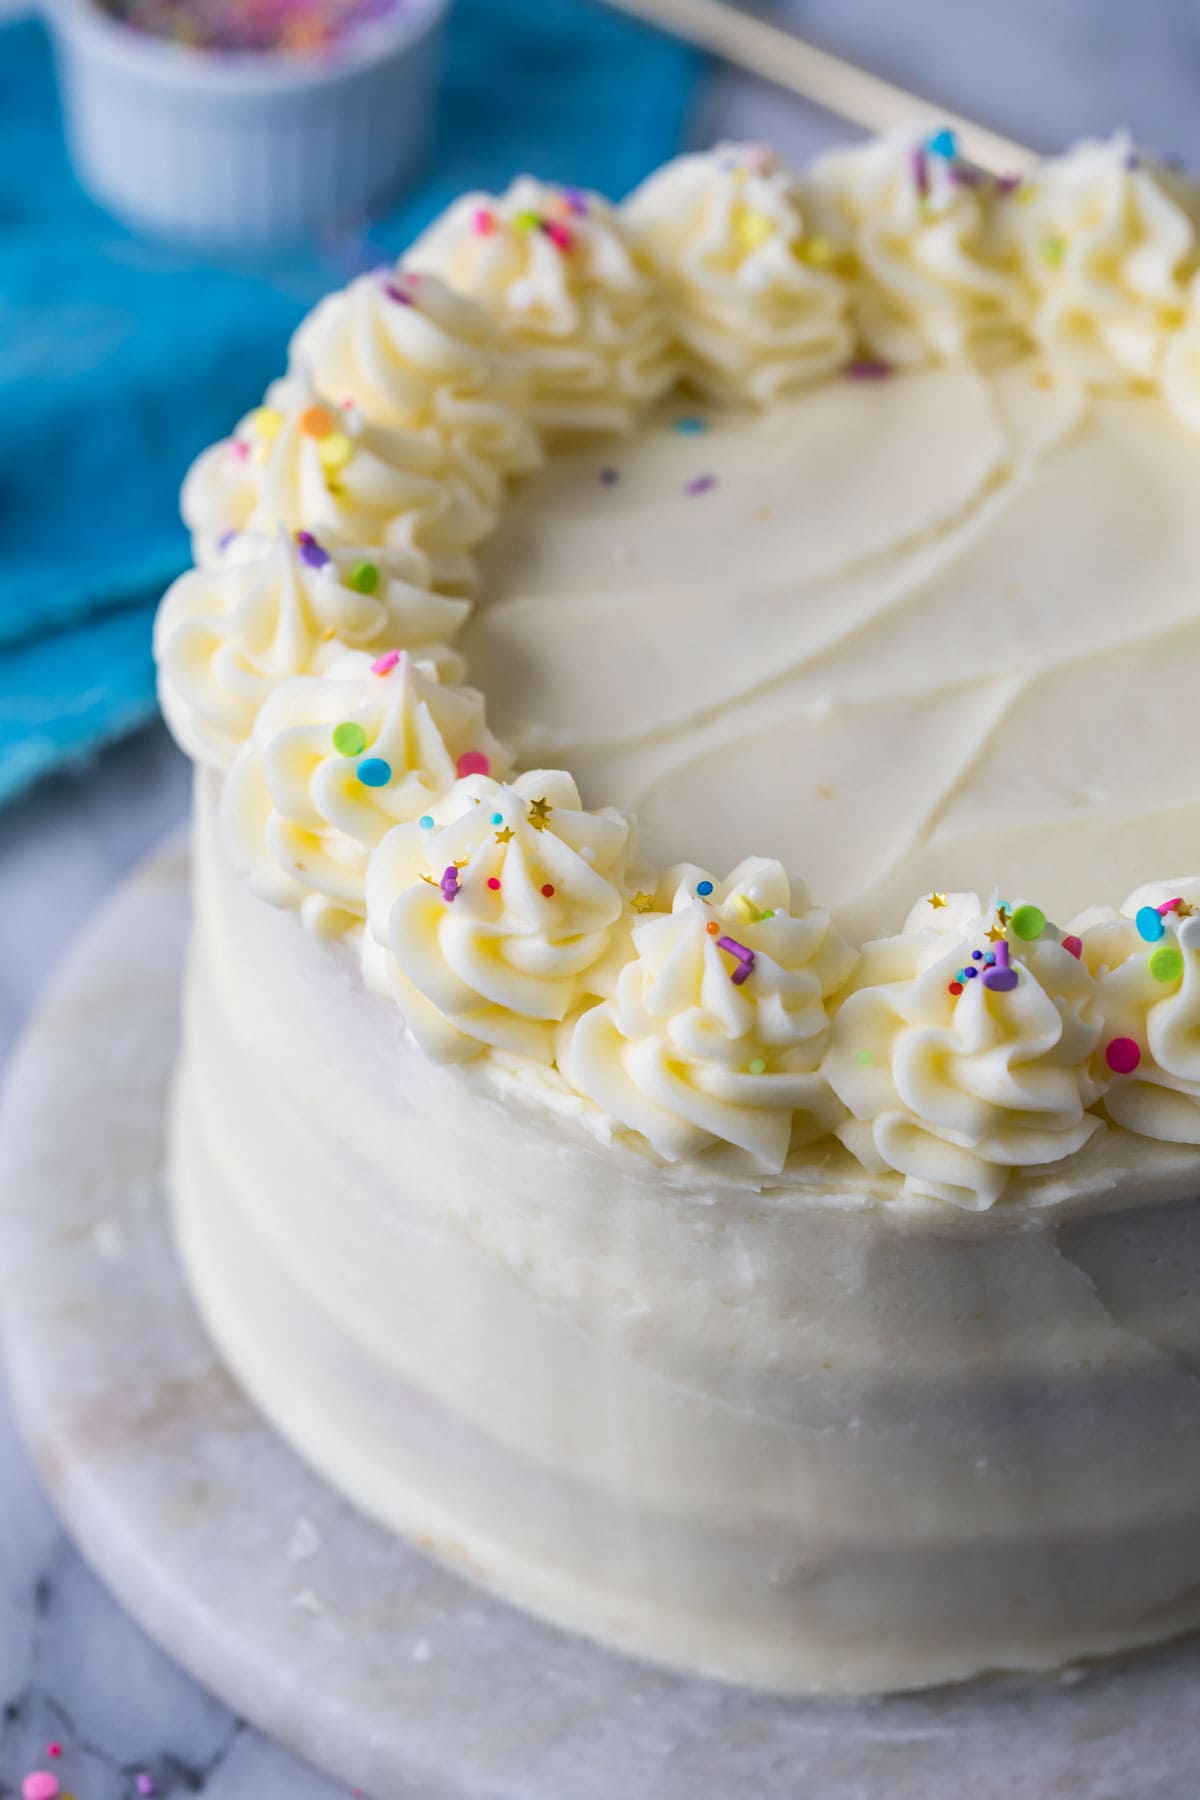 Cake topped with swirls of white icing and sprinkles.